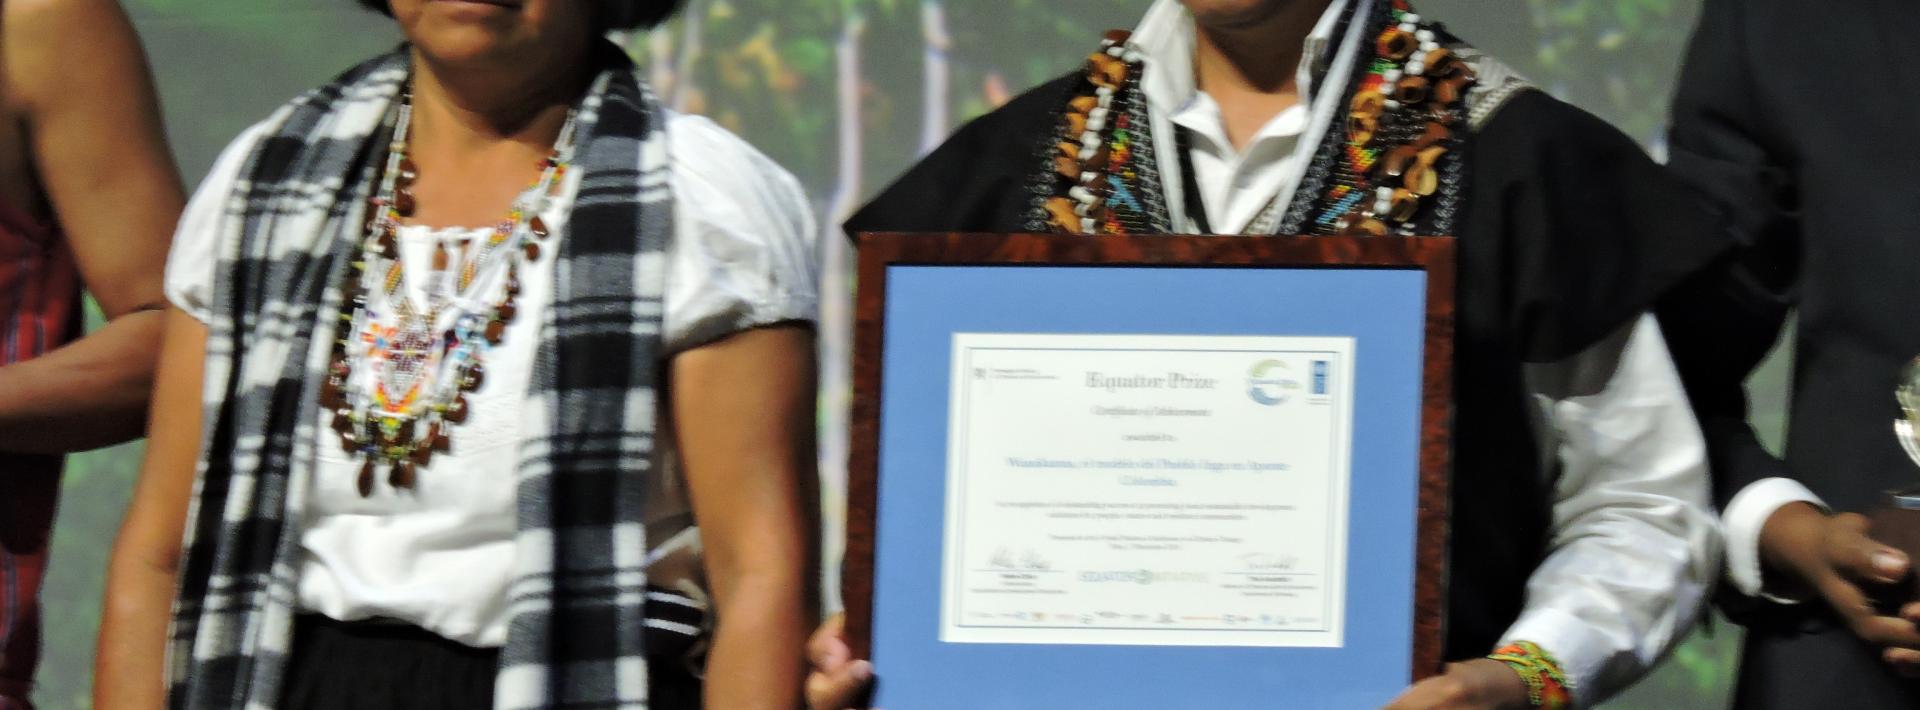 Inga community from Colombia wins Equator prize in Paris